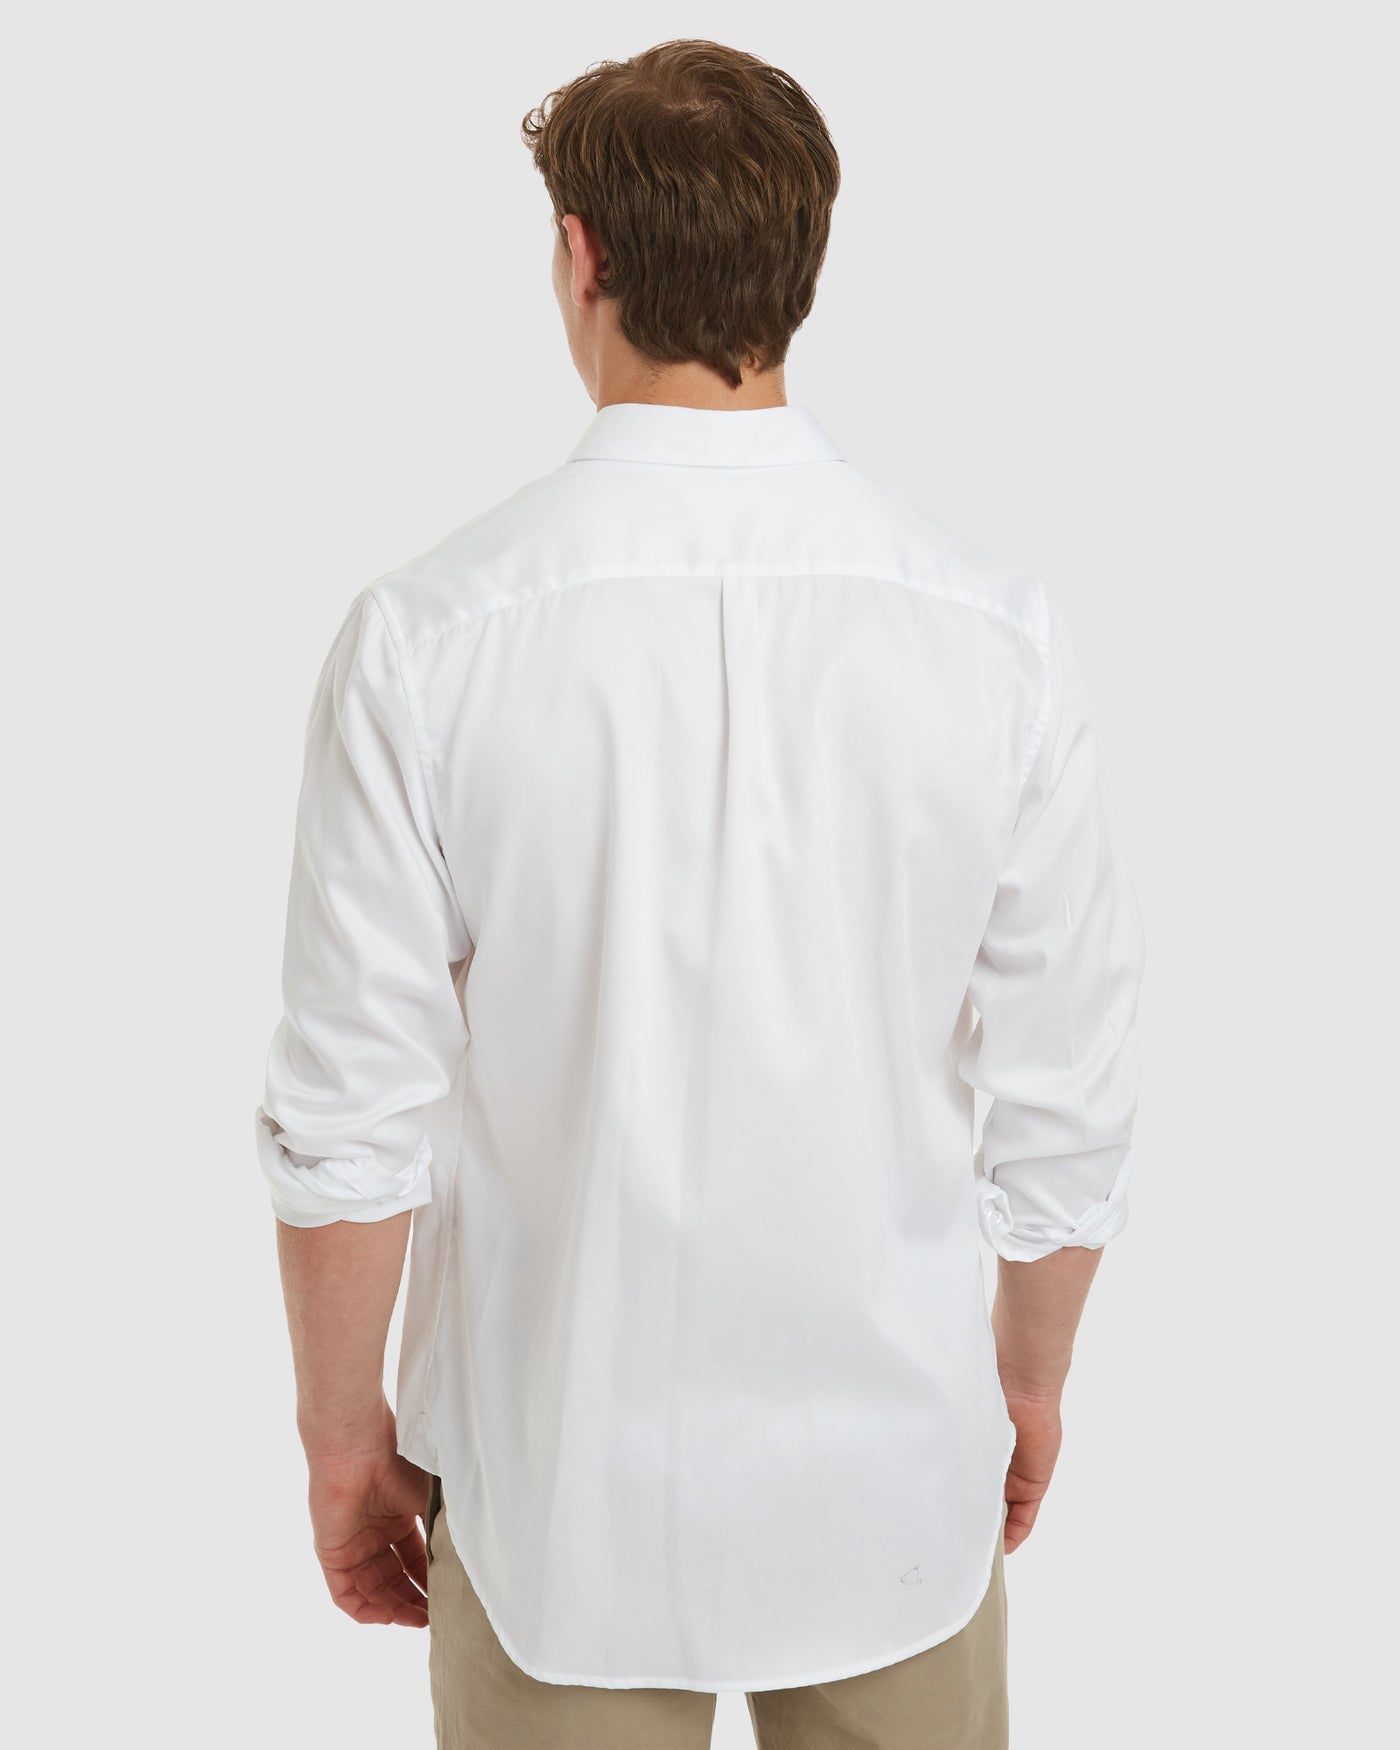 London Formal White Shirt  - Non Iron Casual Fit